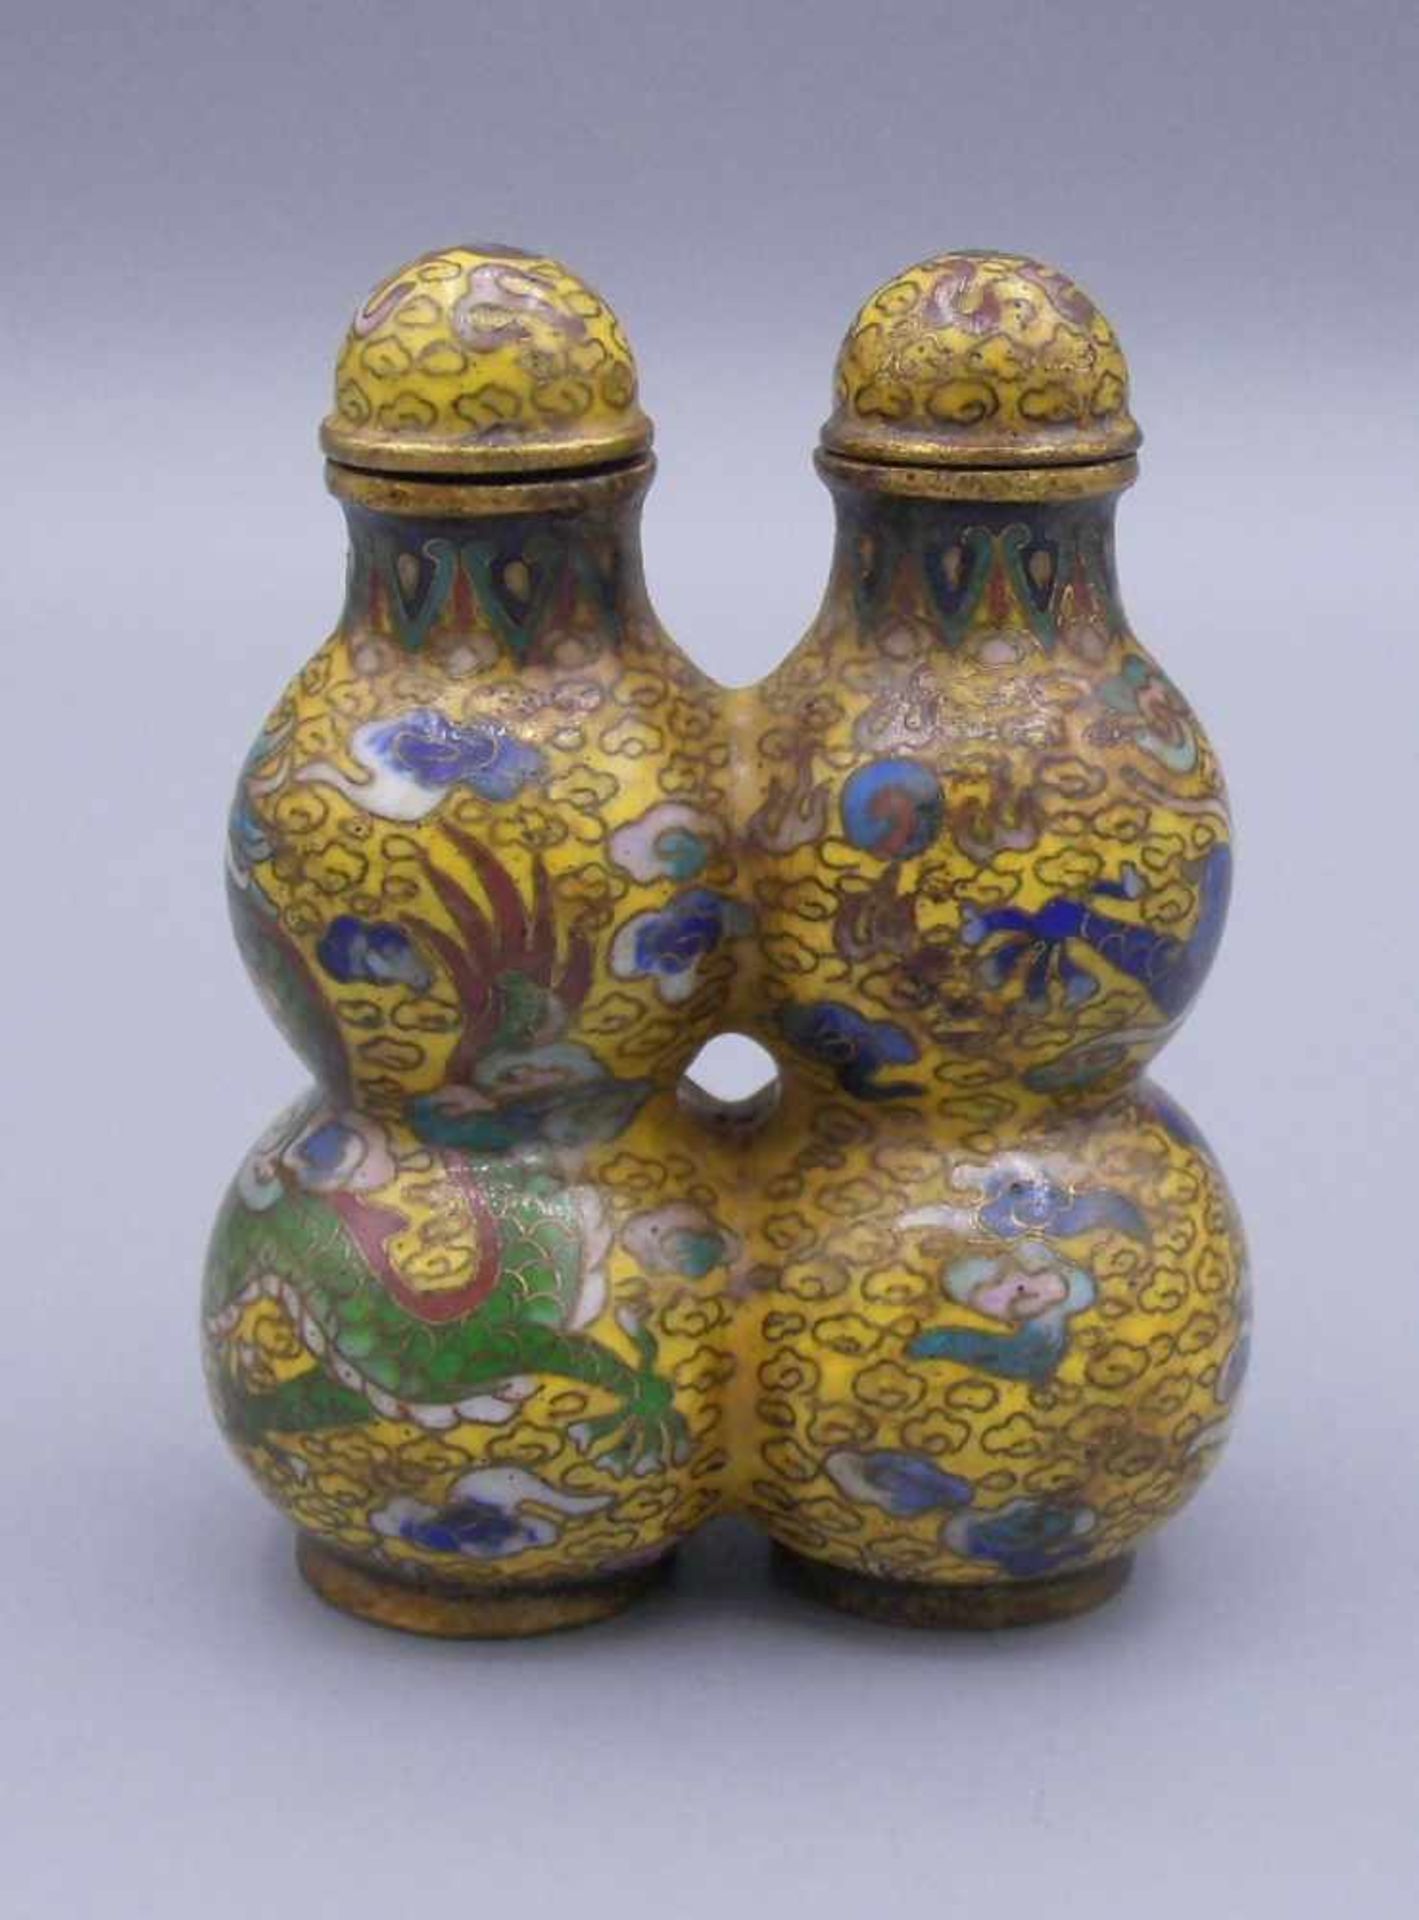 CLOISONNÉ - SNUFFBOTTLE / DOPPEL-SCHNUPFTABAKBEHÄLTER, China, Emaille über Messing. Doppel- - Image 3 of 7